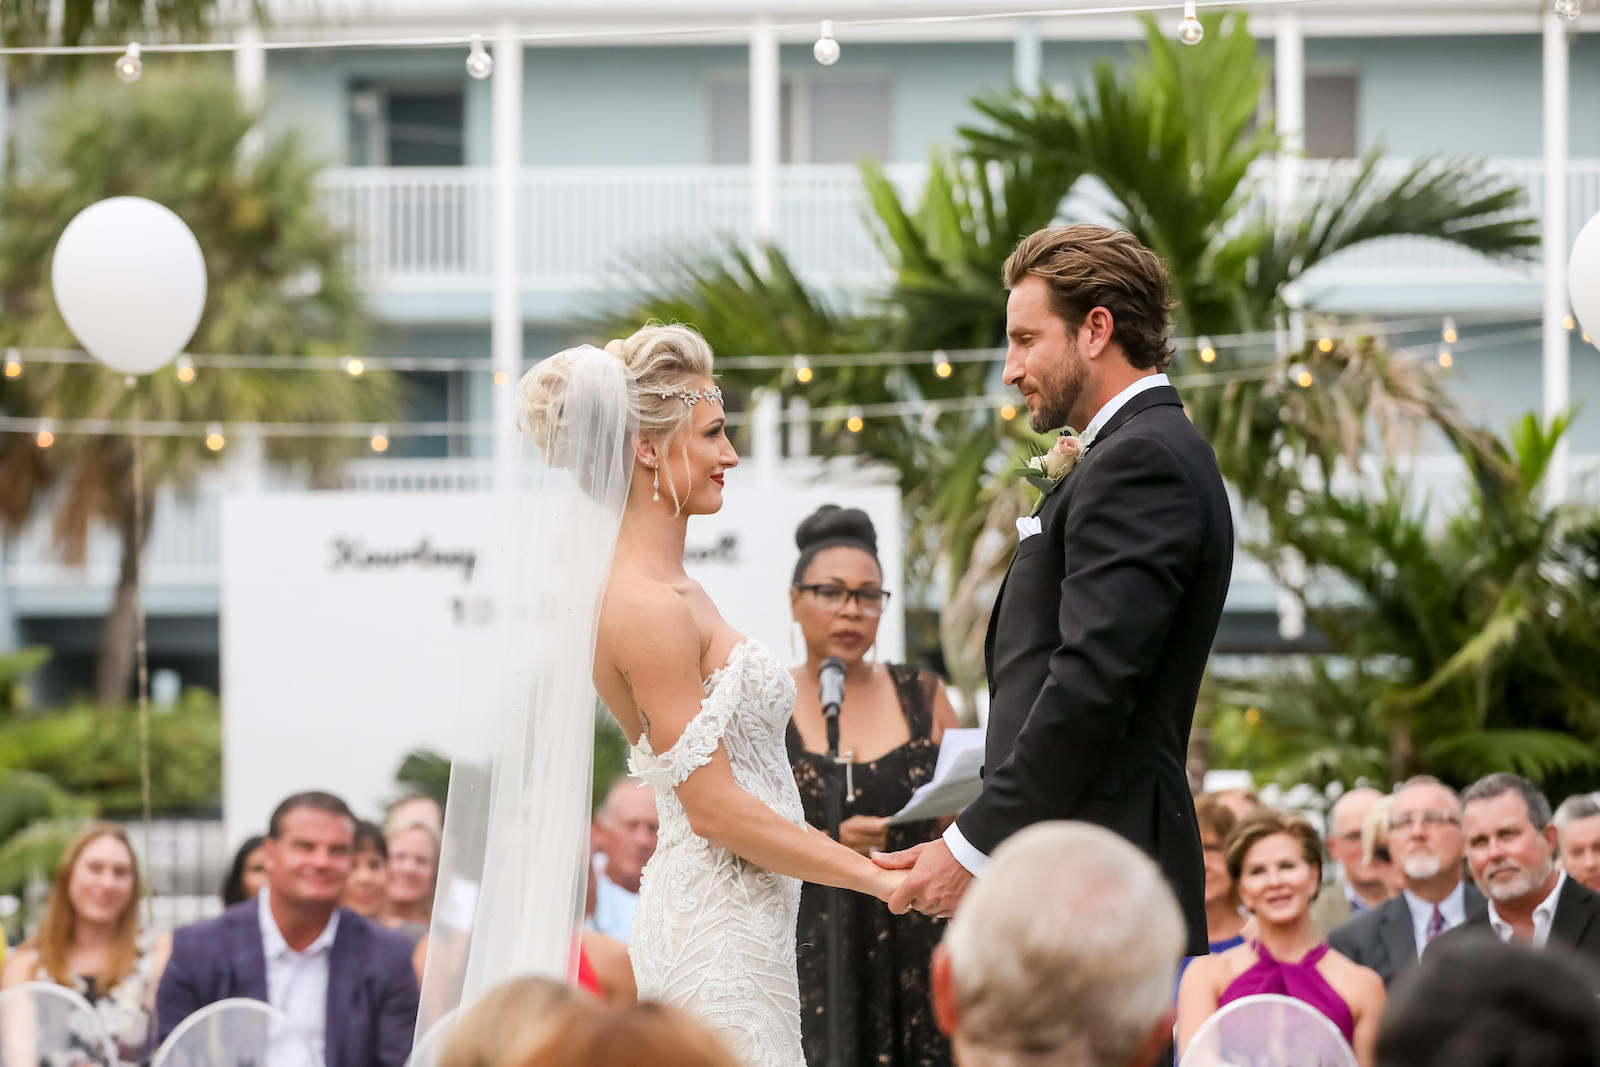 Sarasota Bride and Groom Exchange Vows At Tropical Inspired Outdoor Ceremony at Bali Hali Resort at Anna Marie Island, Bride in Vintage Lace Off the Shoulder Wedding Dress with Crystal Headpiece with Long Veil | Sarasota Wedding Planner Kelly Kennedy Weddings | Florida Wedding Photographer Lifelong Photography Studio